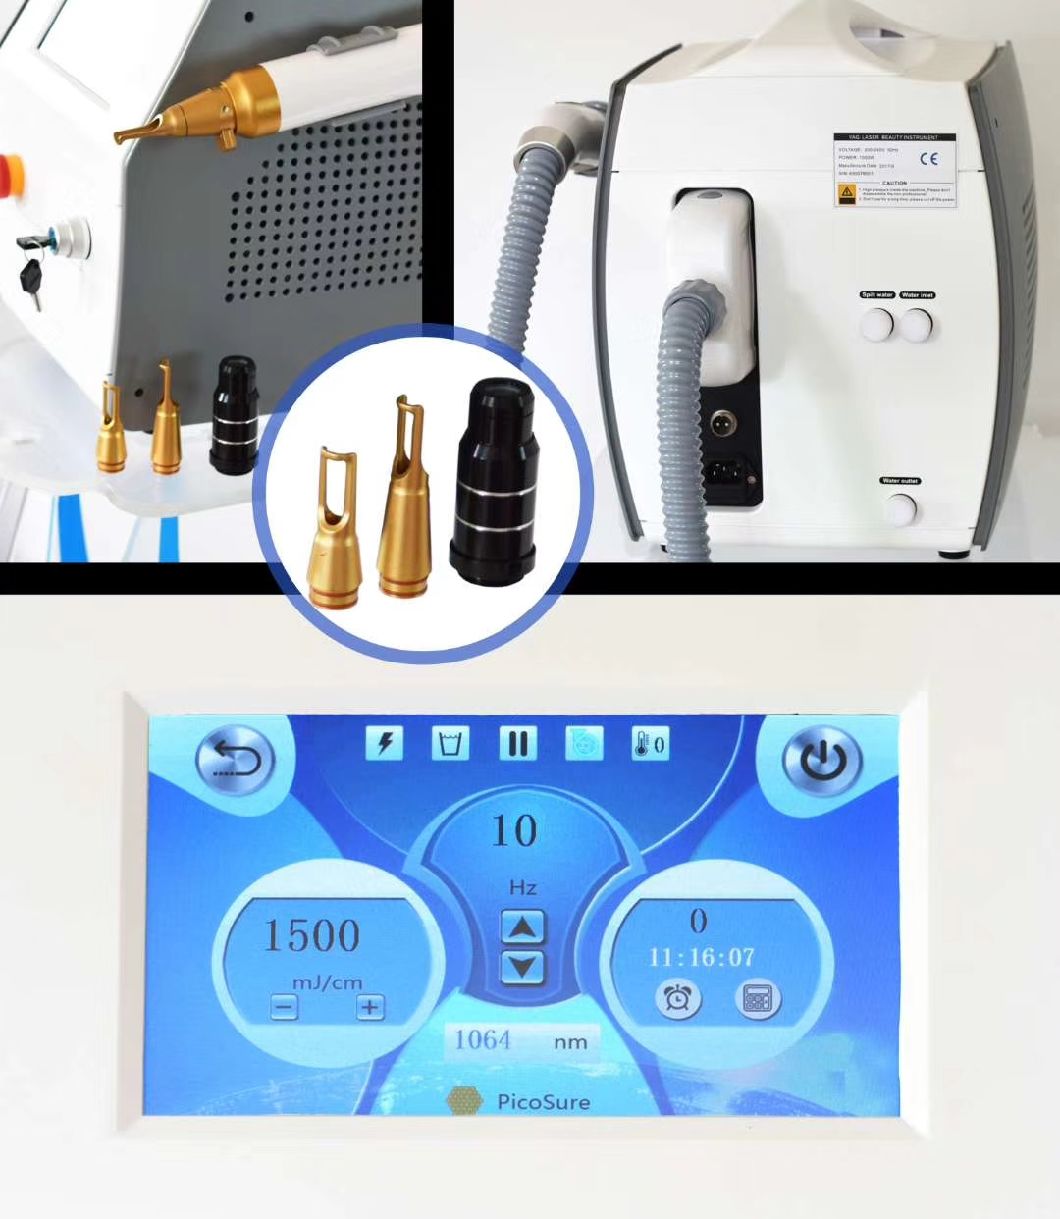 No Shots Limited, Q-Switched Laser Picosecond Laser Pico Laser Machine Tattoo Removal